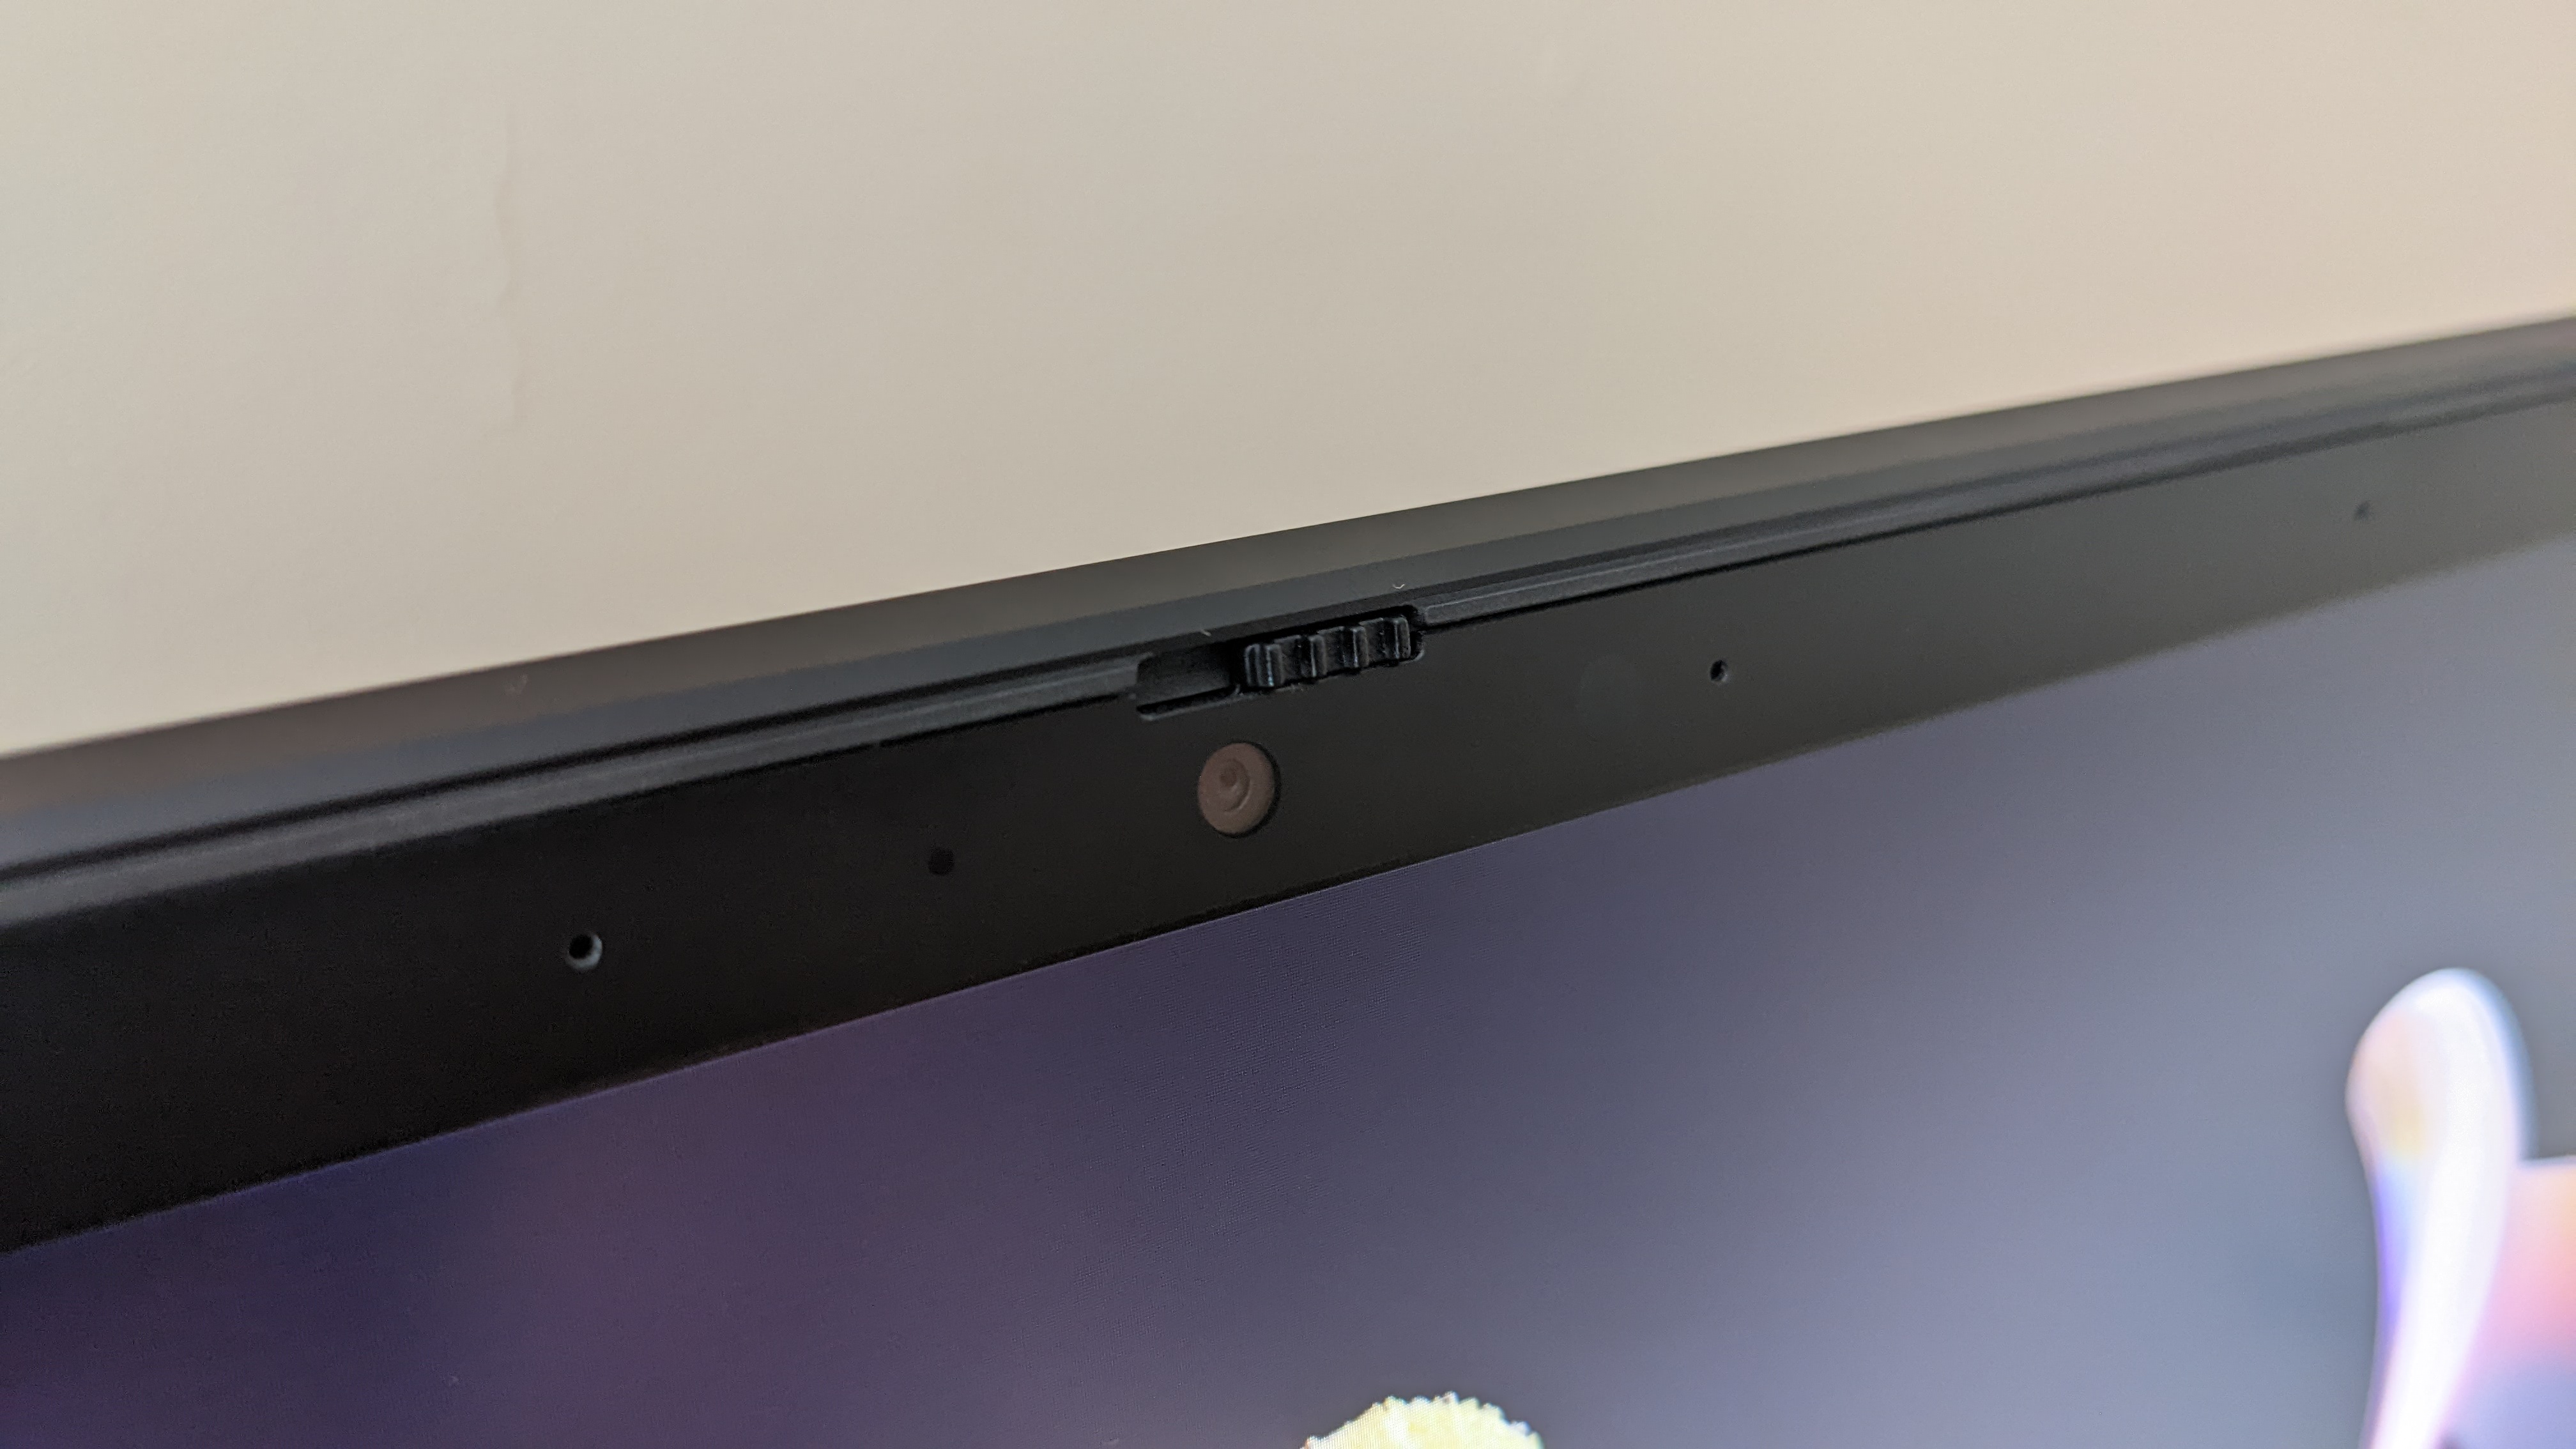 Closeup of the webcam and privacy shutter on the Corsair Voyager a1600 laptop.